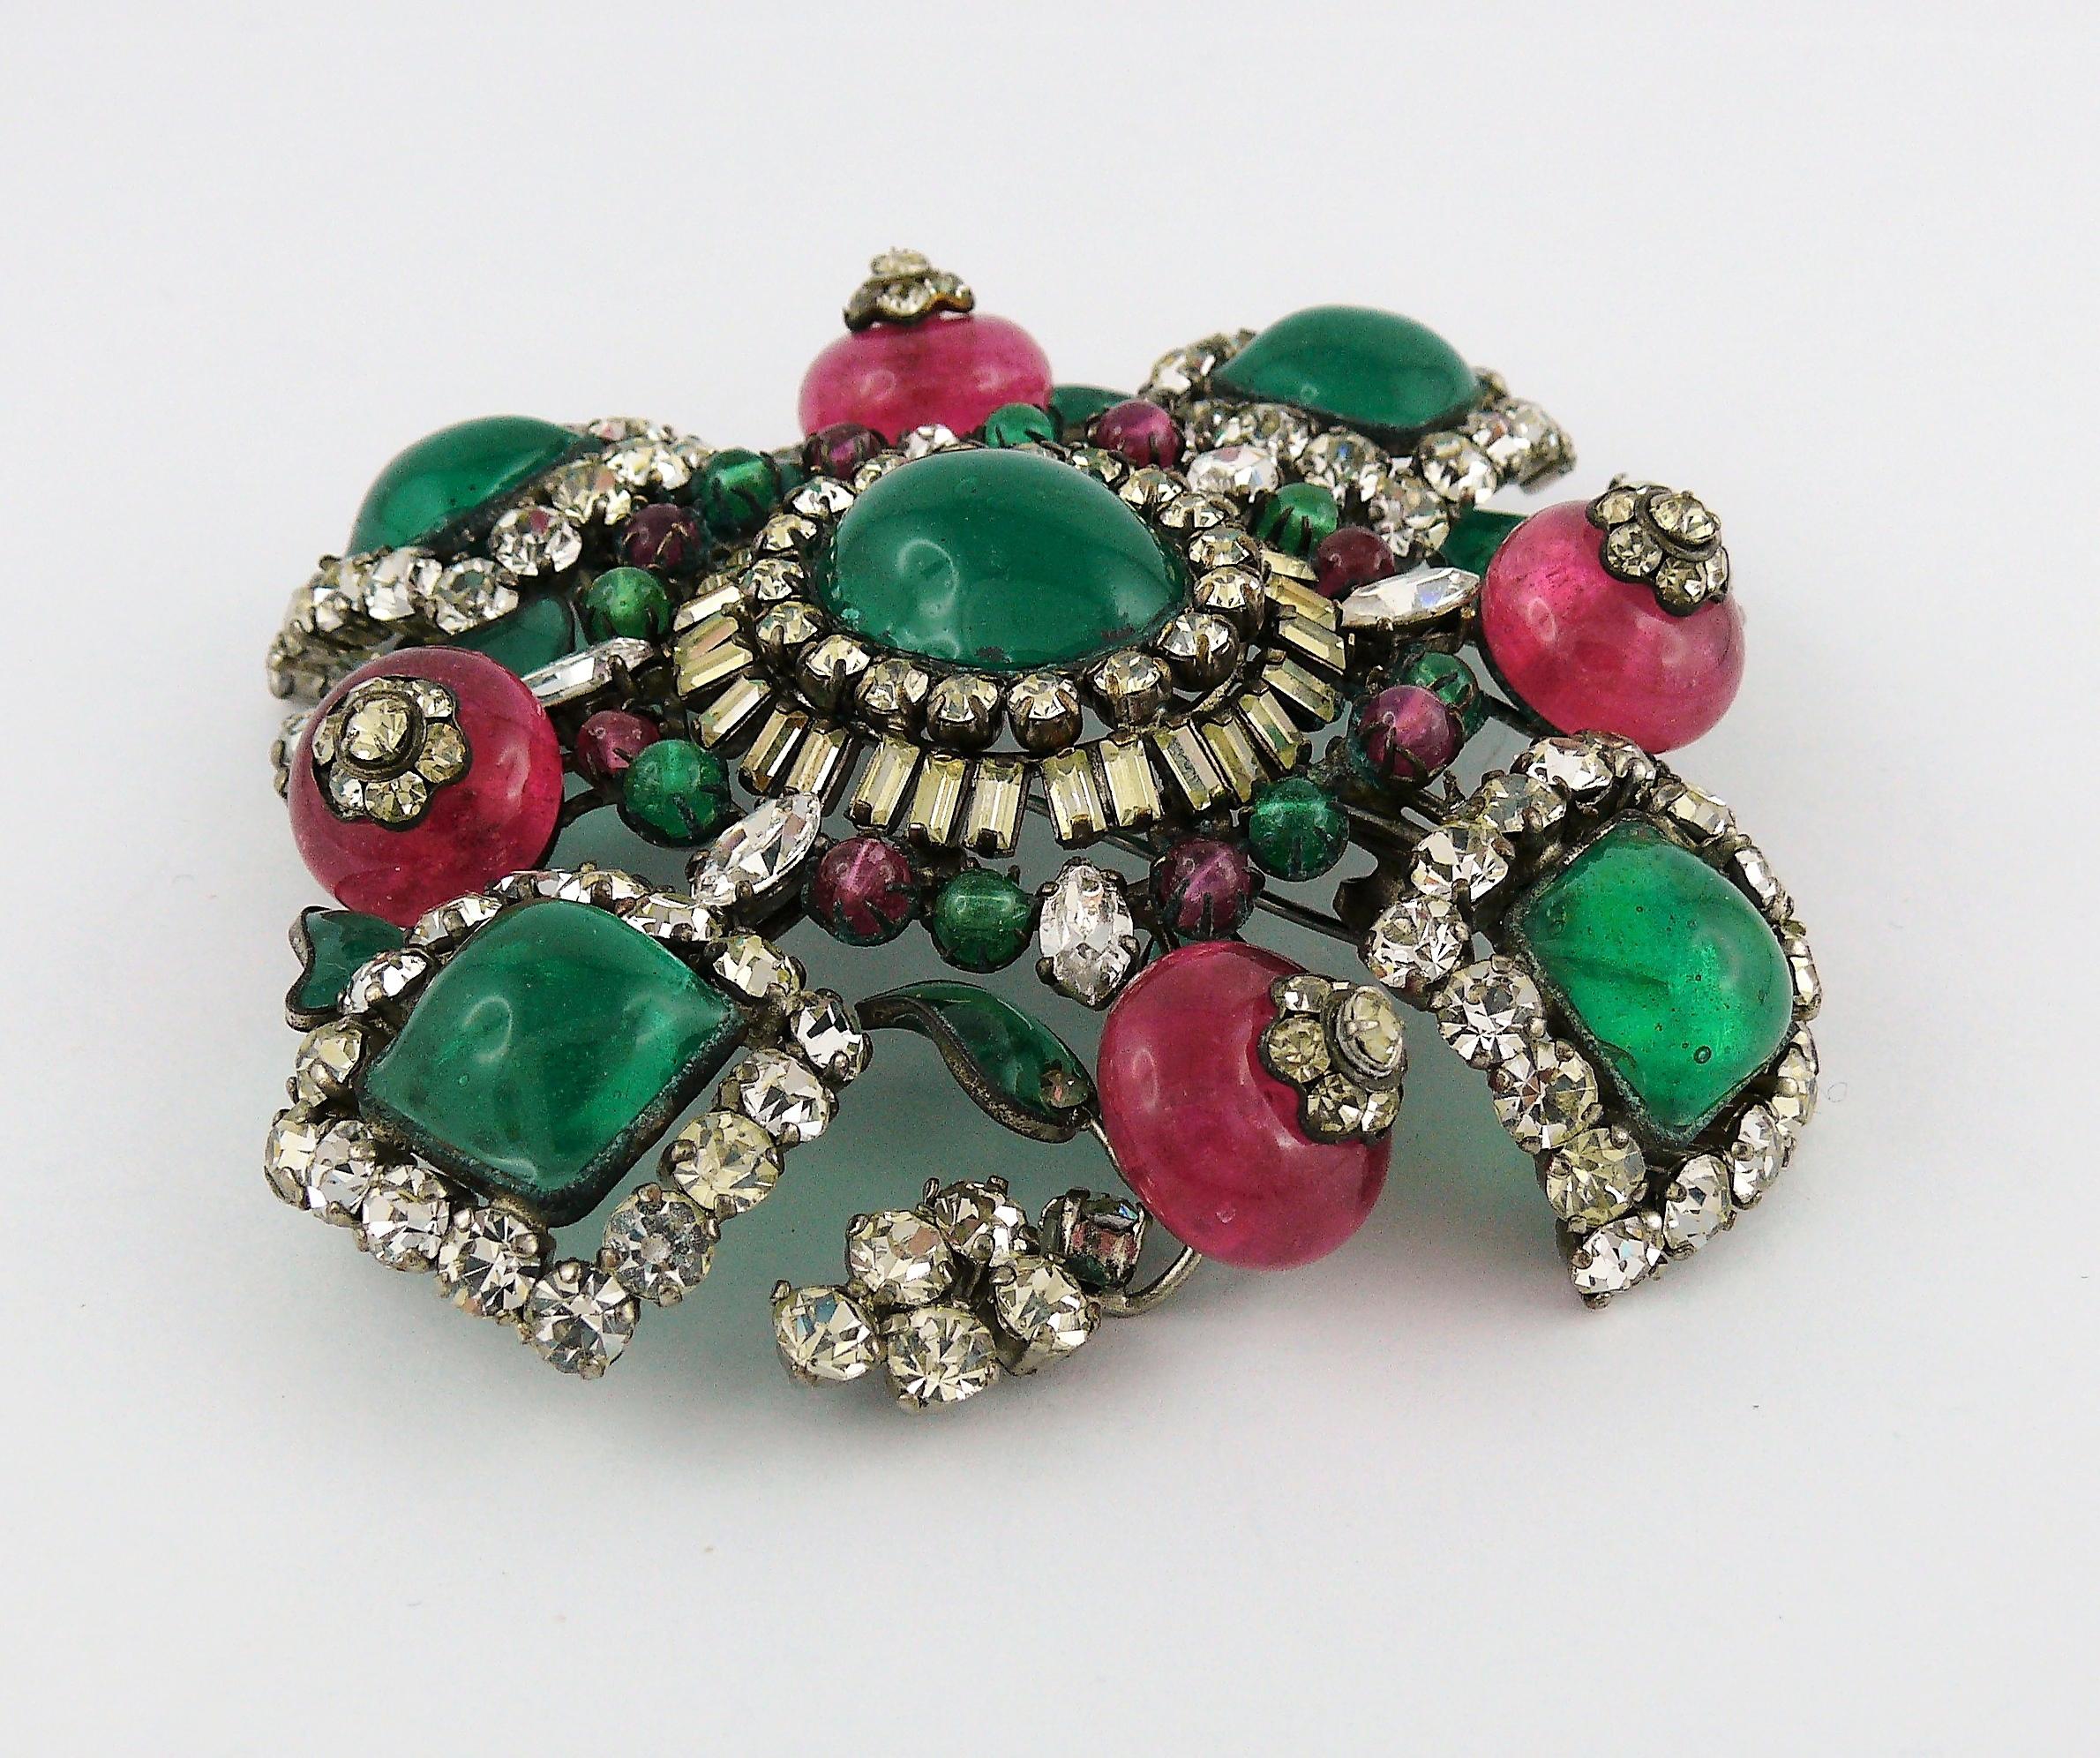 Women's Magnificent Vintage Poured Glass Jewelled Massive Brooch Pendant 